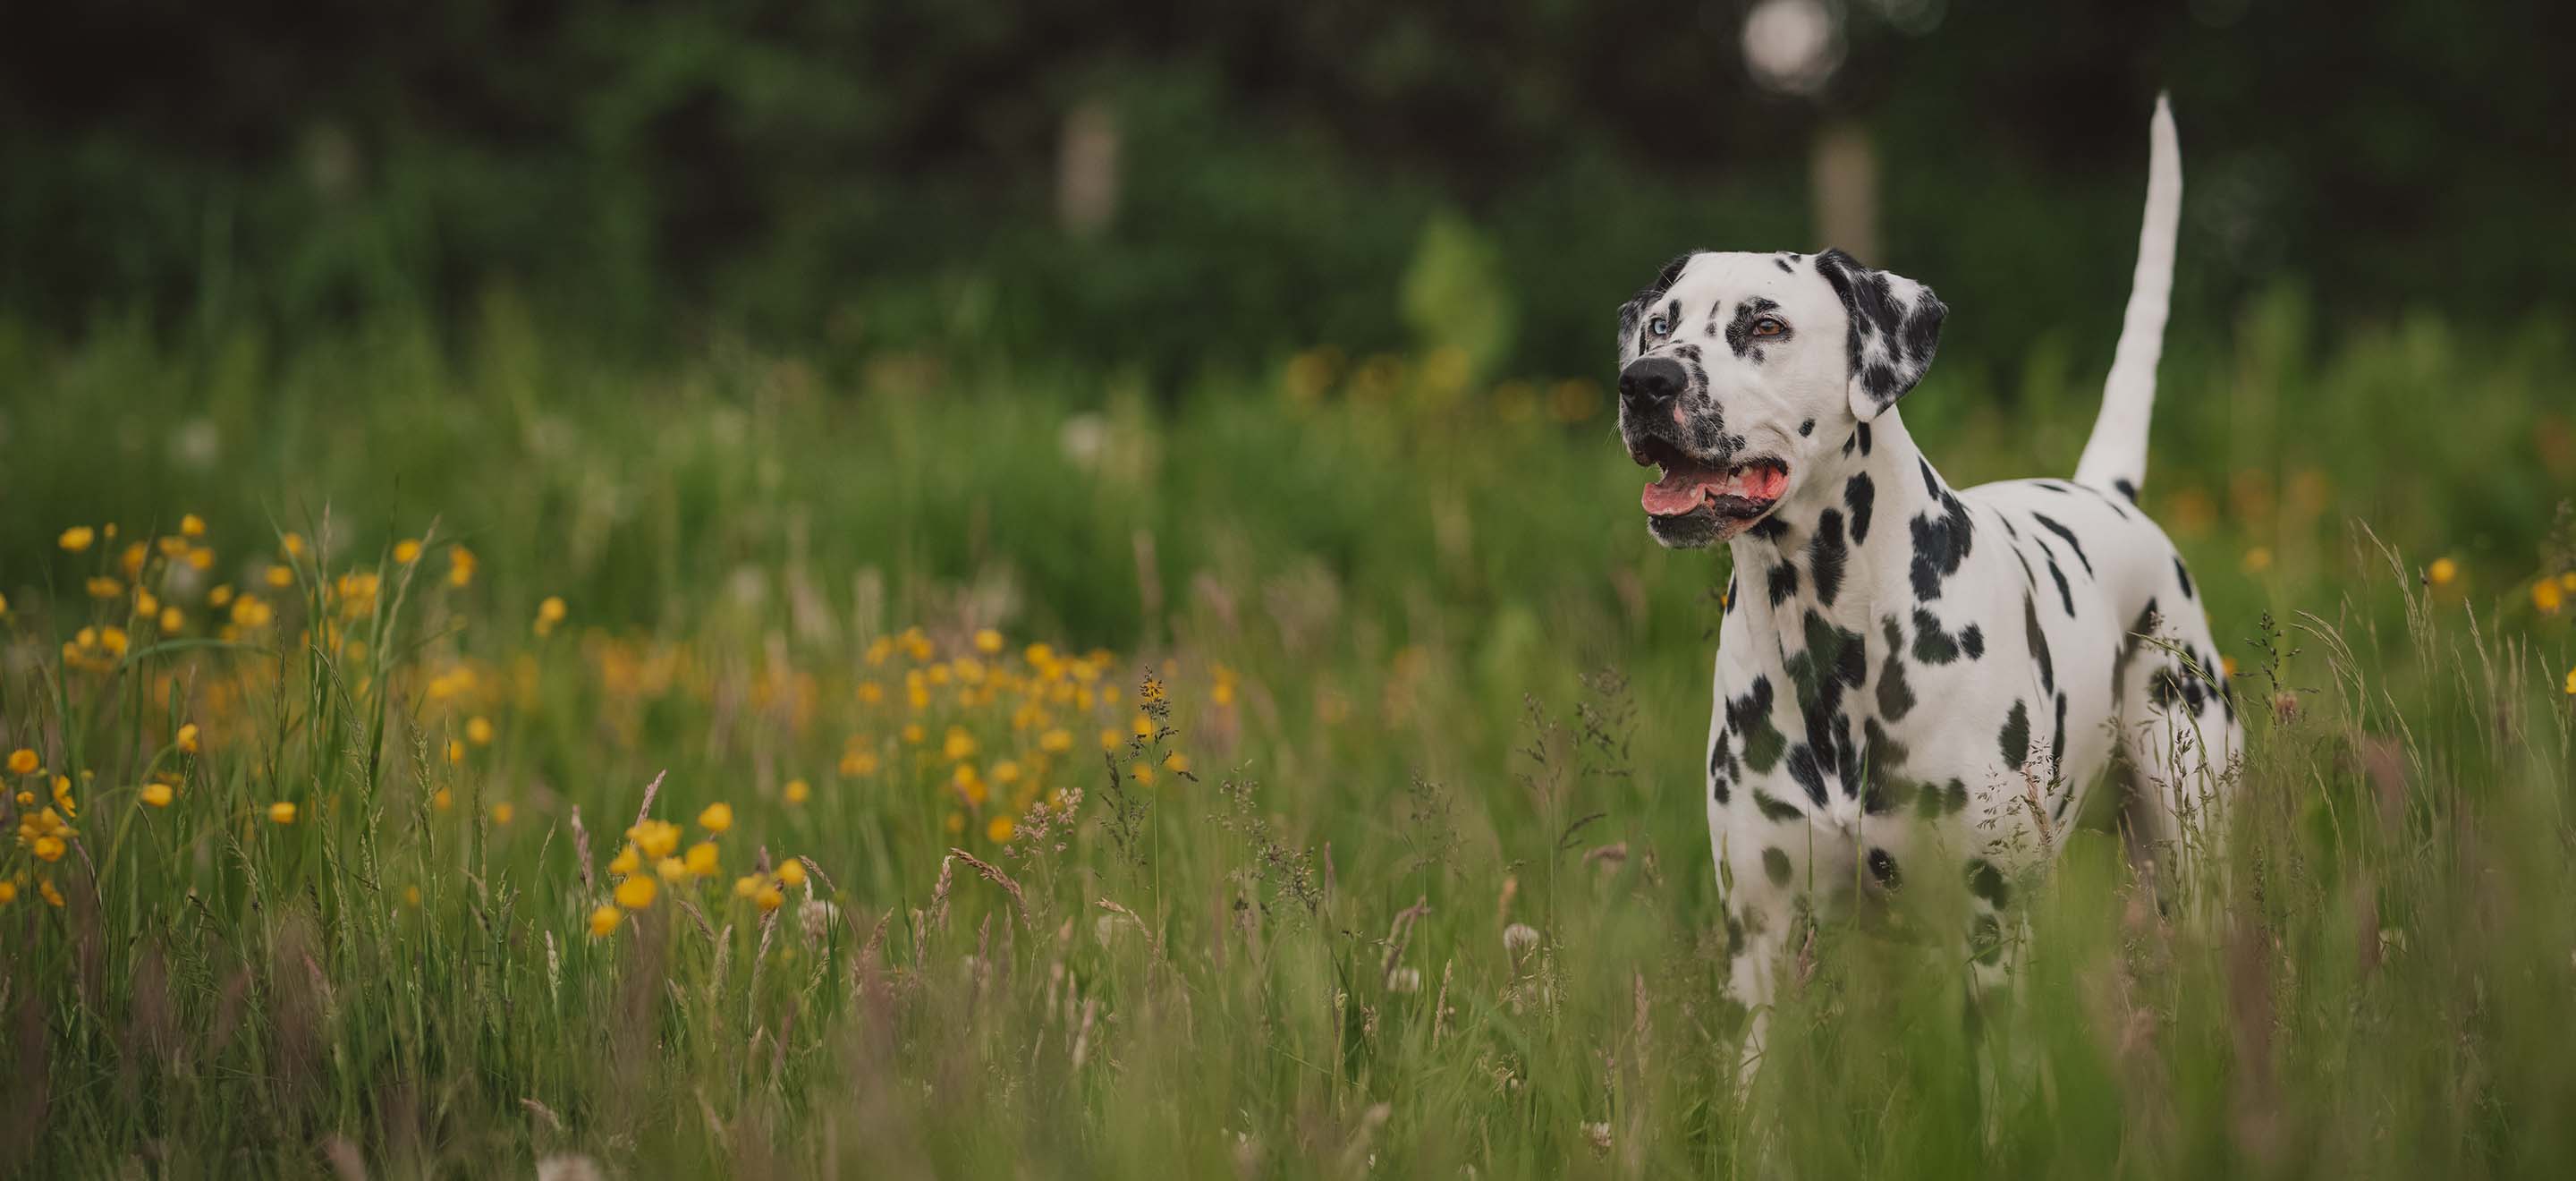 A Dalmatian dog standing in a field of tall glass and yellow wildflowers image